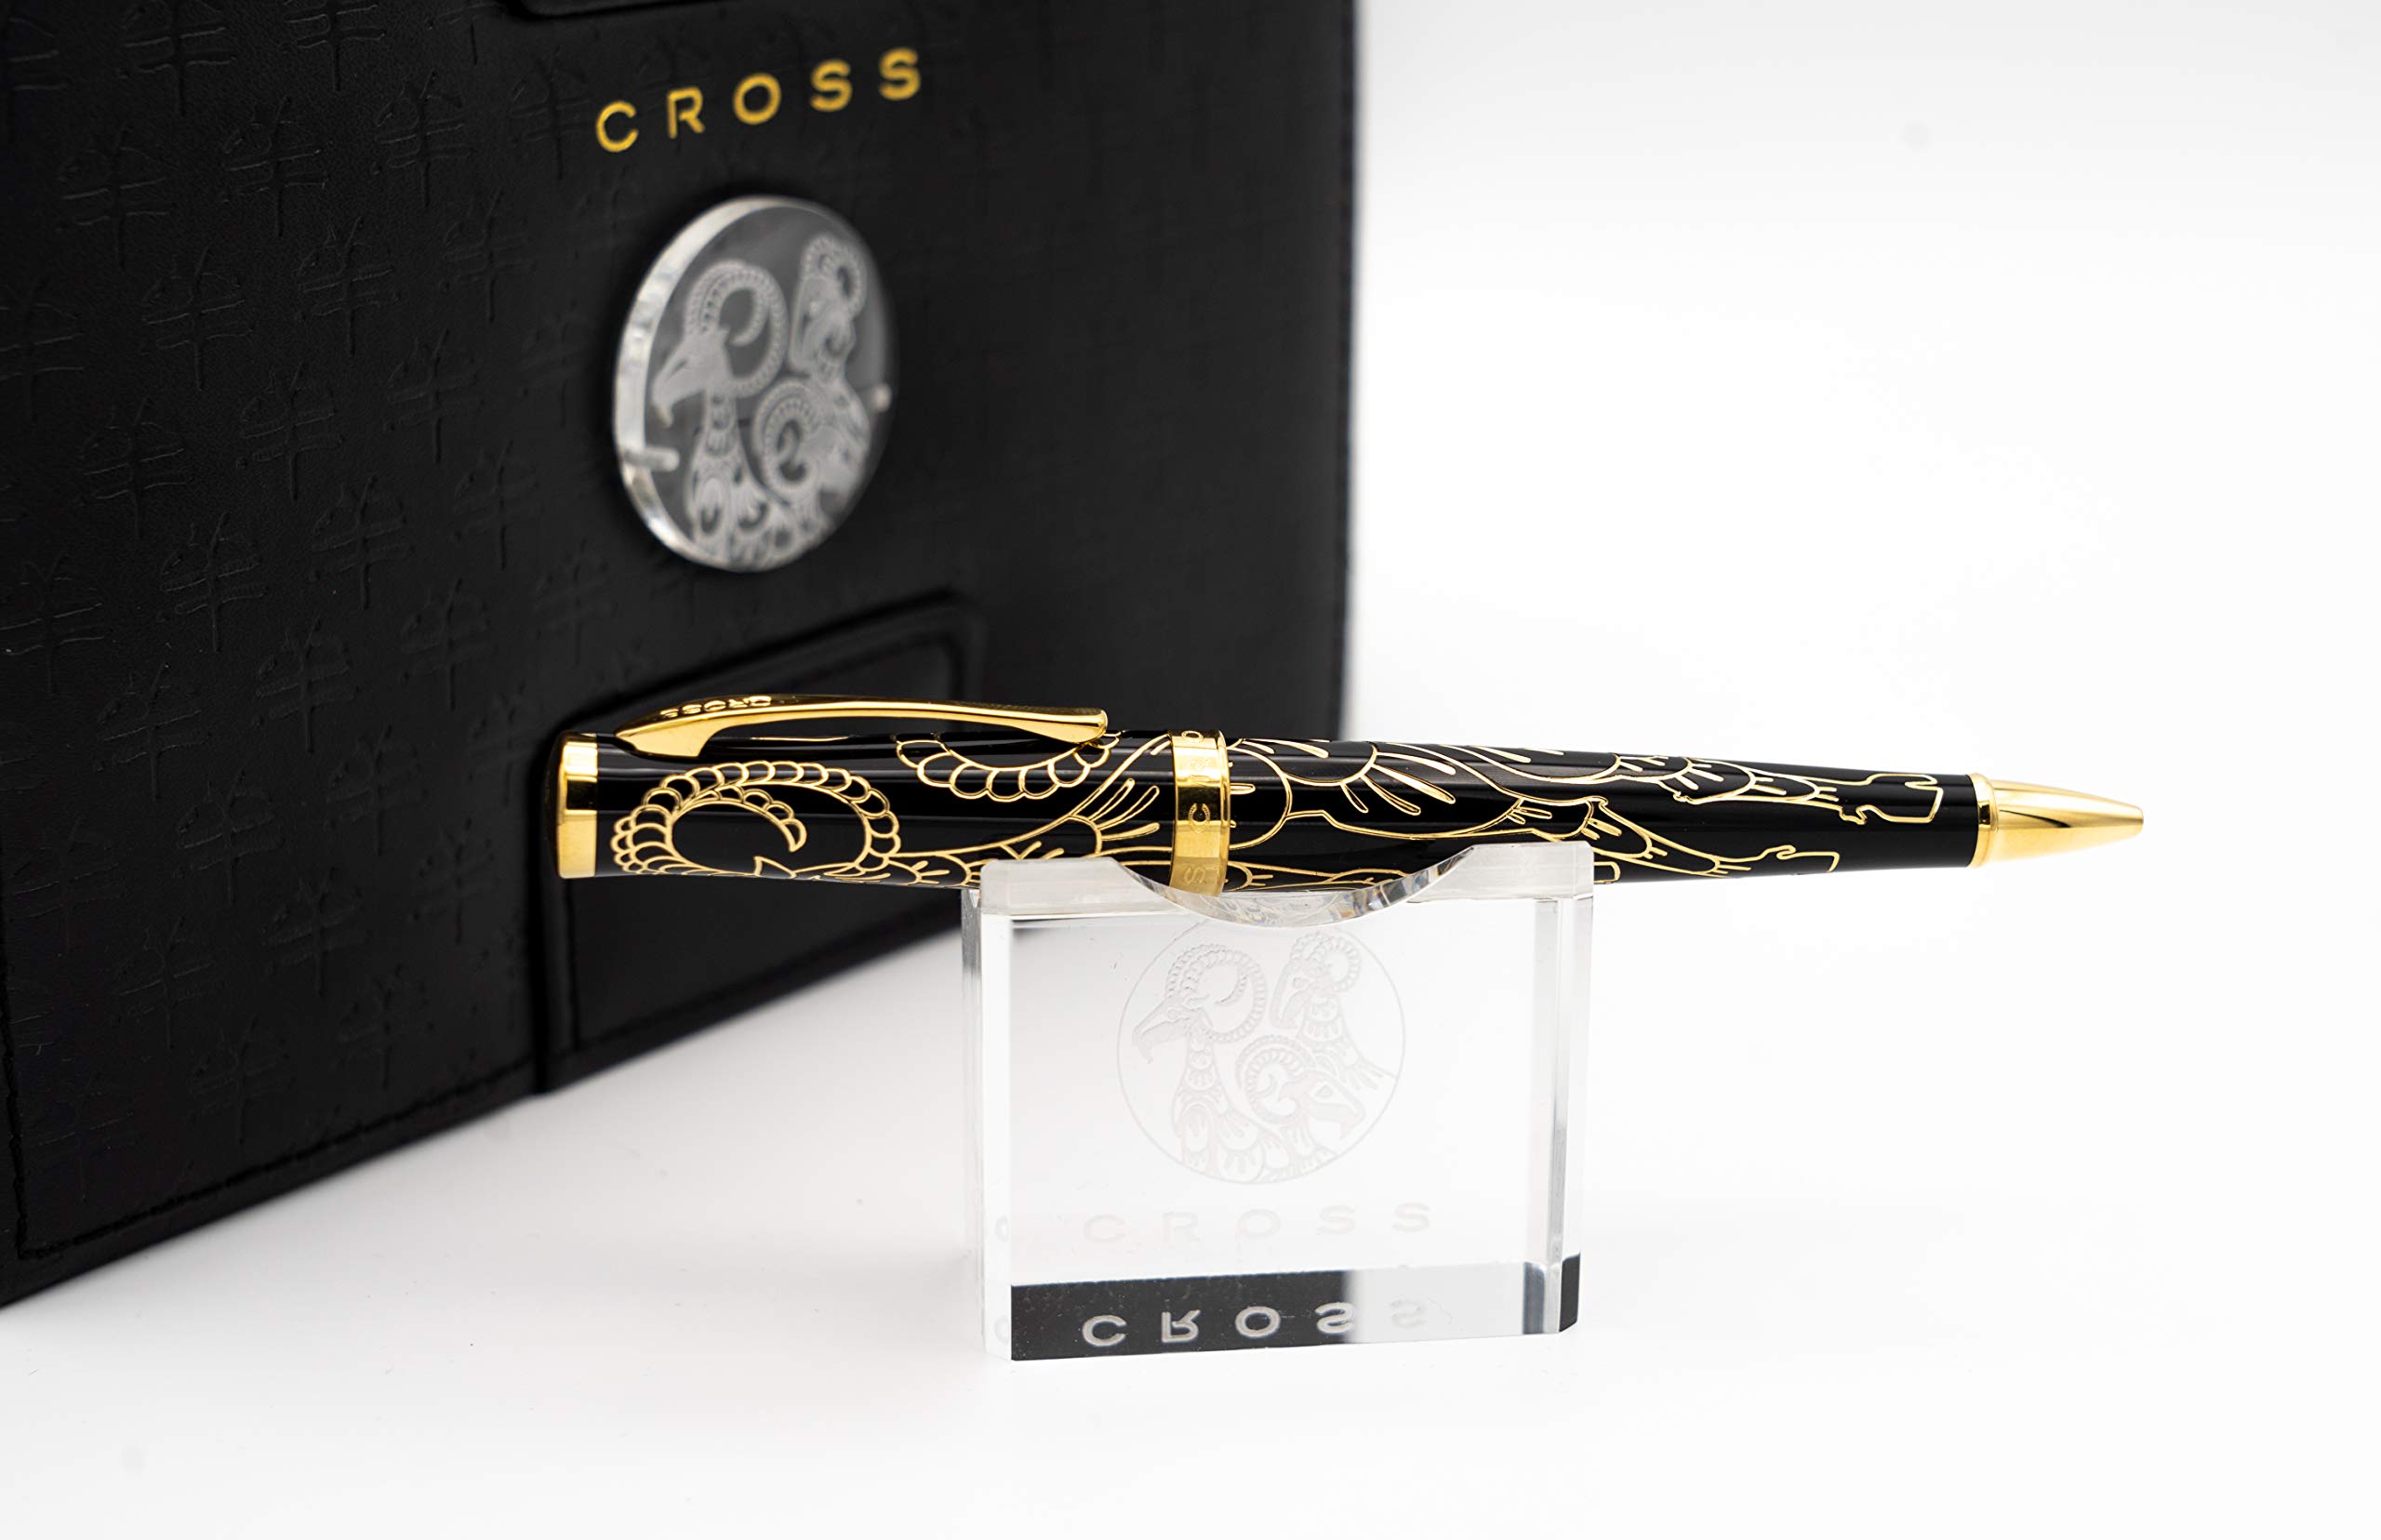 Cross Special Edition Hand made Year of the Goat - Black Lacquer and polished 23KT gold overlays and appointments Ballpoint Pen in its Original big...